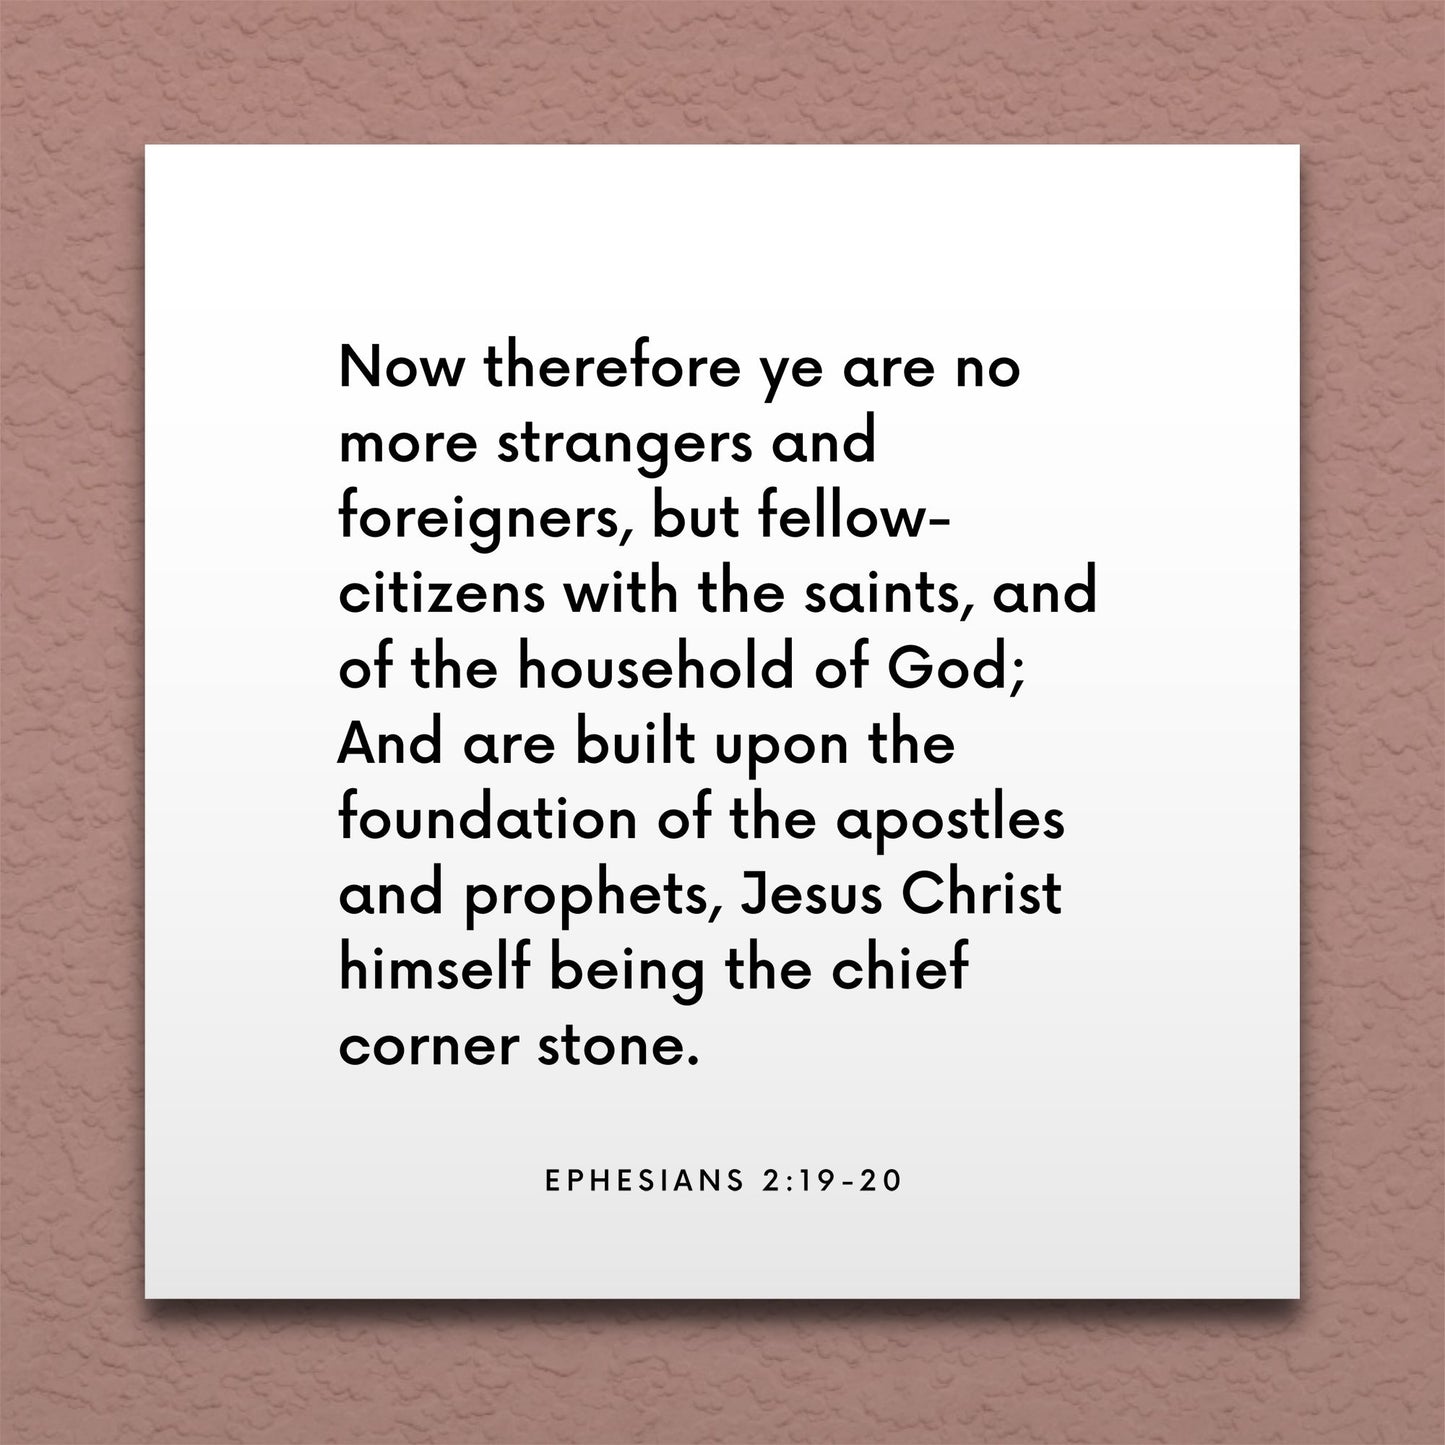 Wall-mounted scripture tile for Ephesians 2:19-20 - "Ye are no more strangers or foreigners, but fellowcitizens"